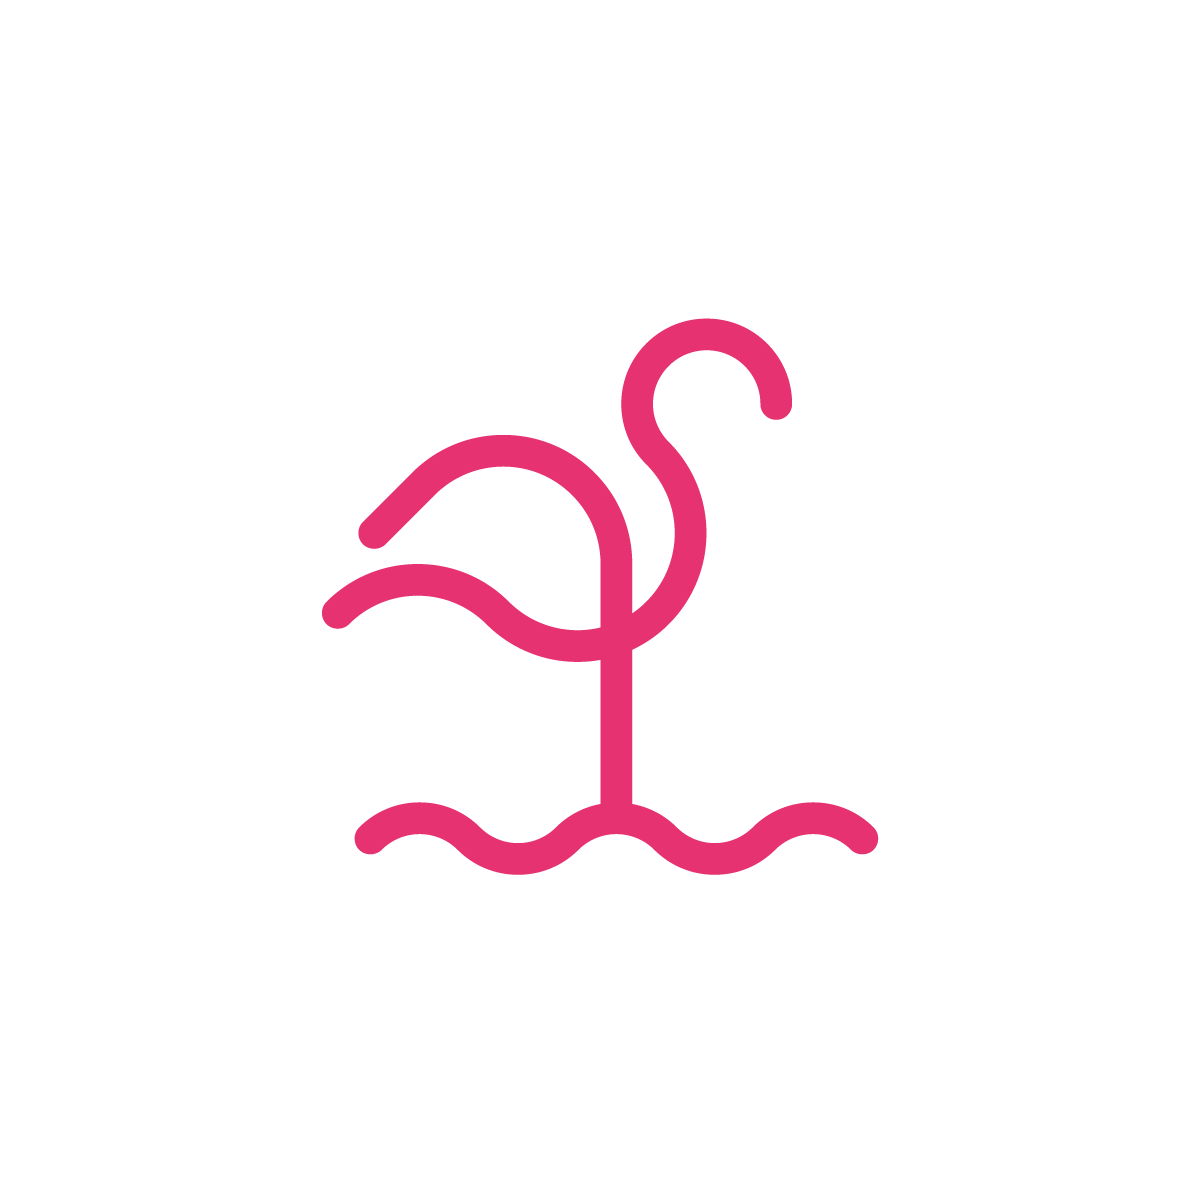 Stylized flamingo logo crafted with lines and circles, showcasing sophistication and suitability for the beauty industry.